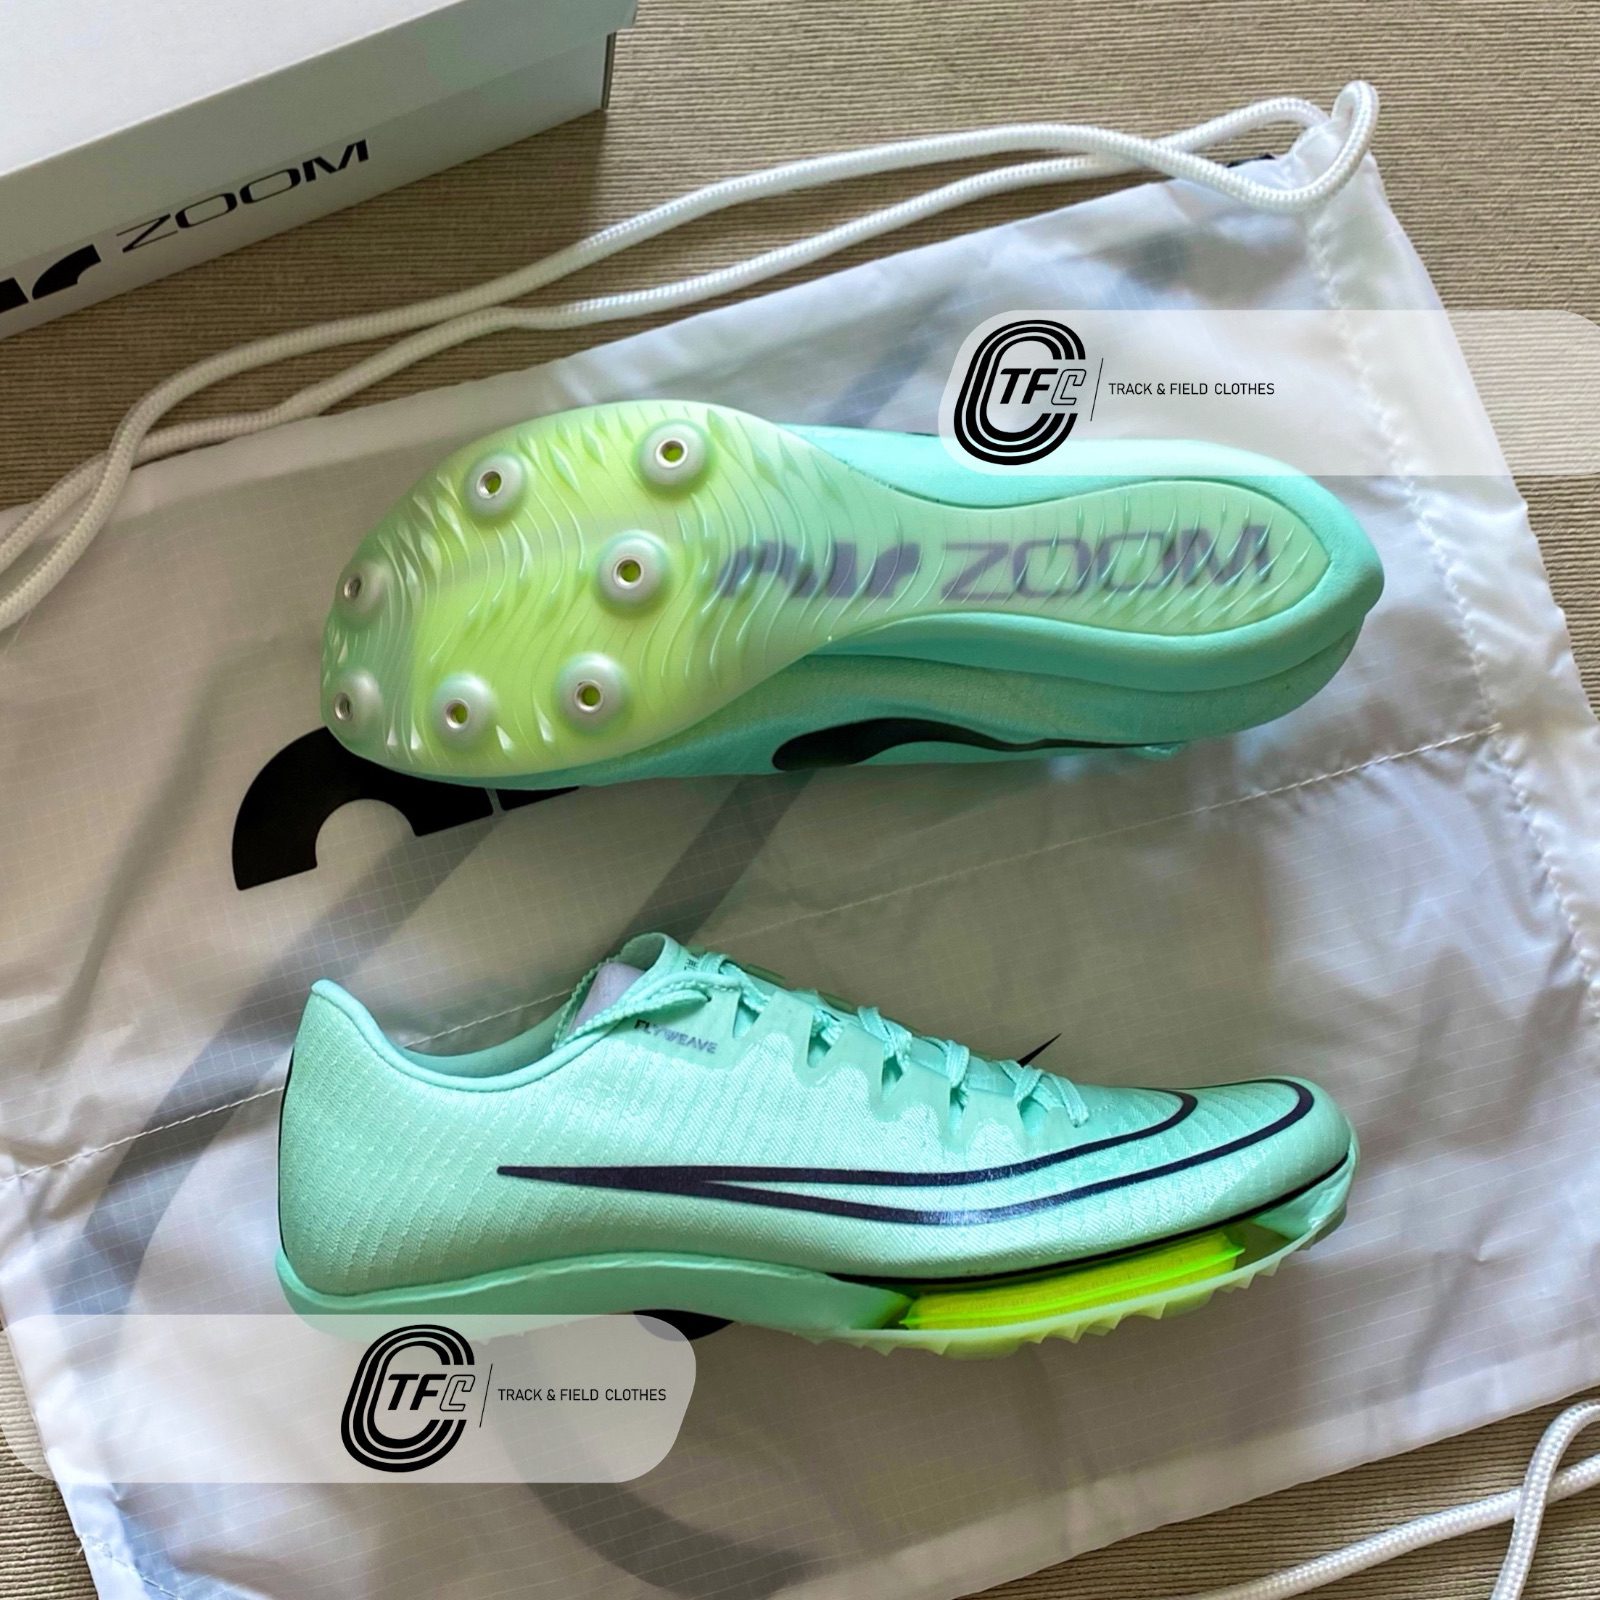 Nike Air Zoom Maxfly | Trackandfieldclothes